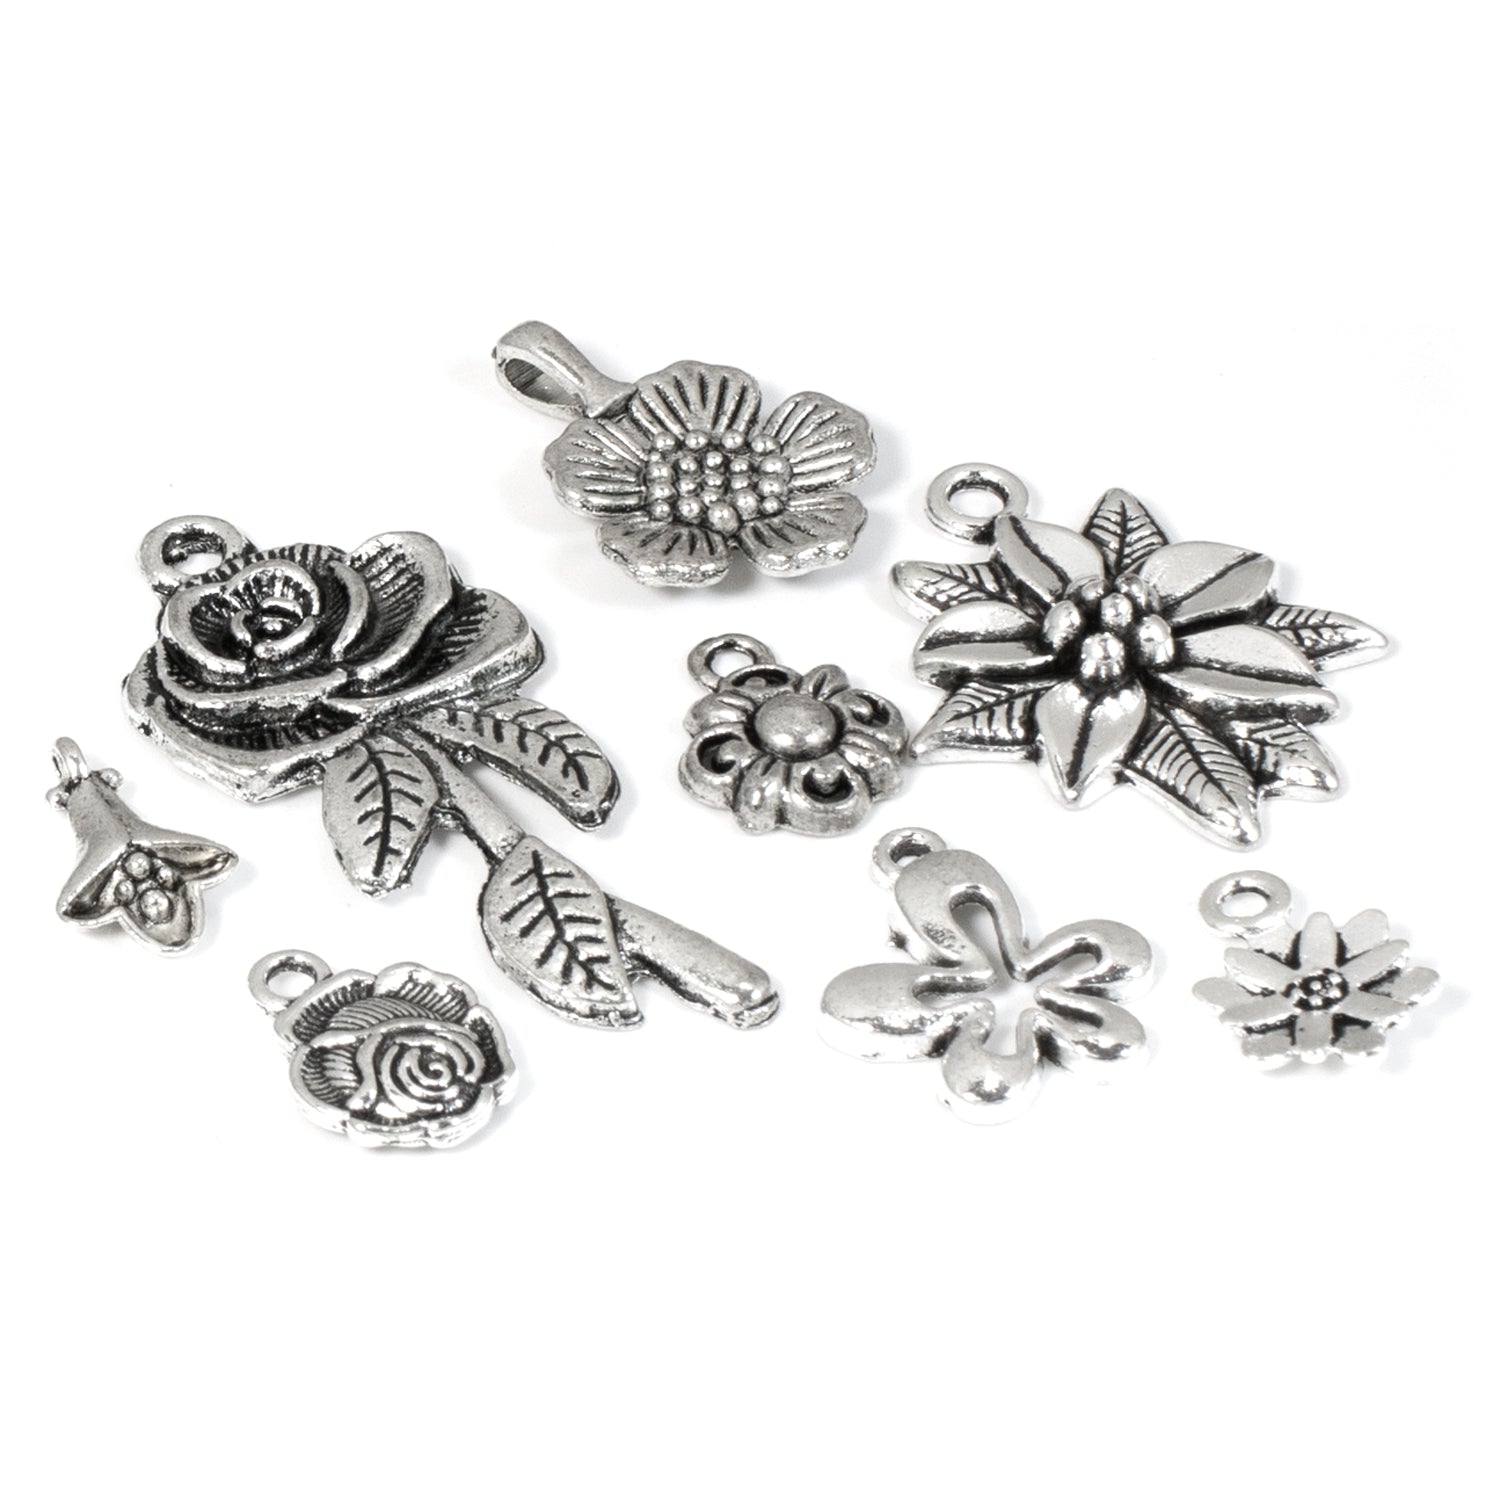 Youdiyla 100pcs Mix Silver Tree Flower Charms Collection, Bulk Mini Small Little Charms Metal Pendant Craft Supplies Findings for Necklace and